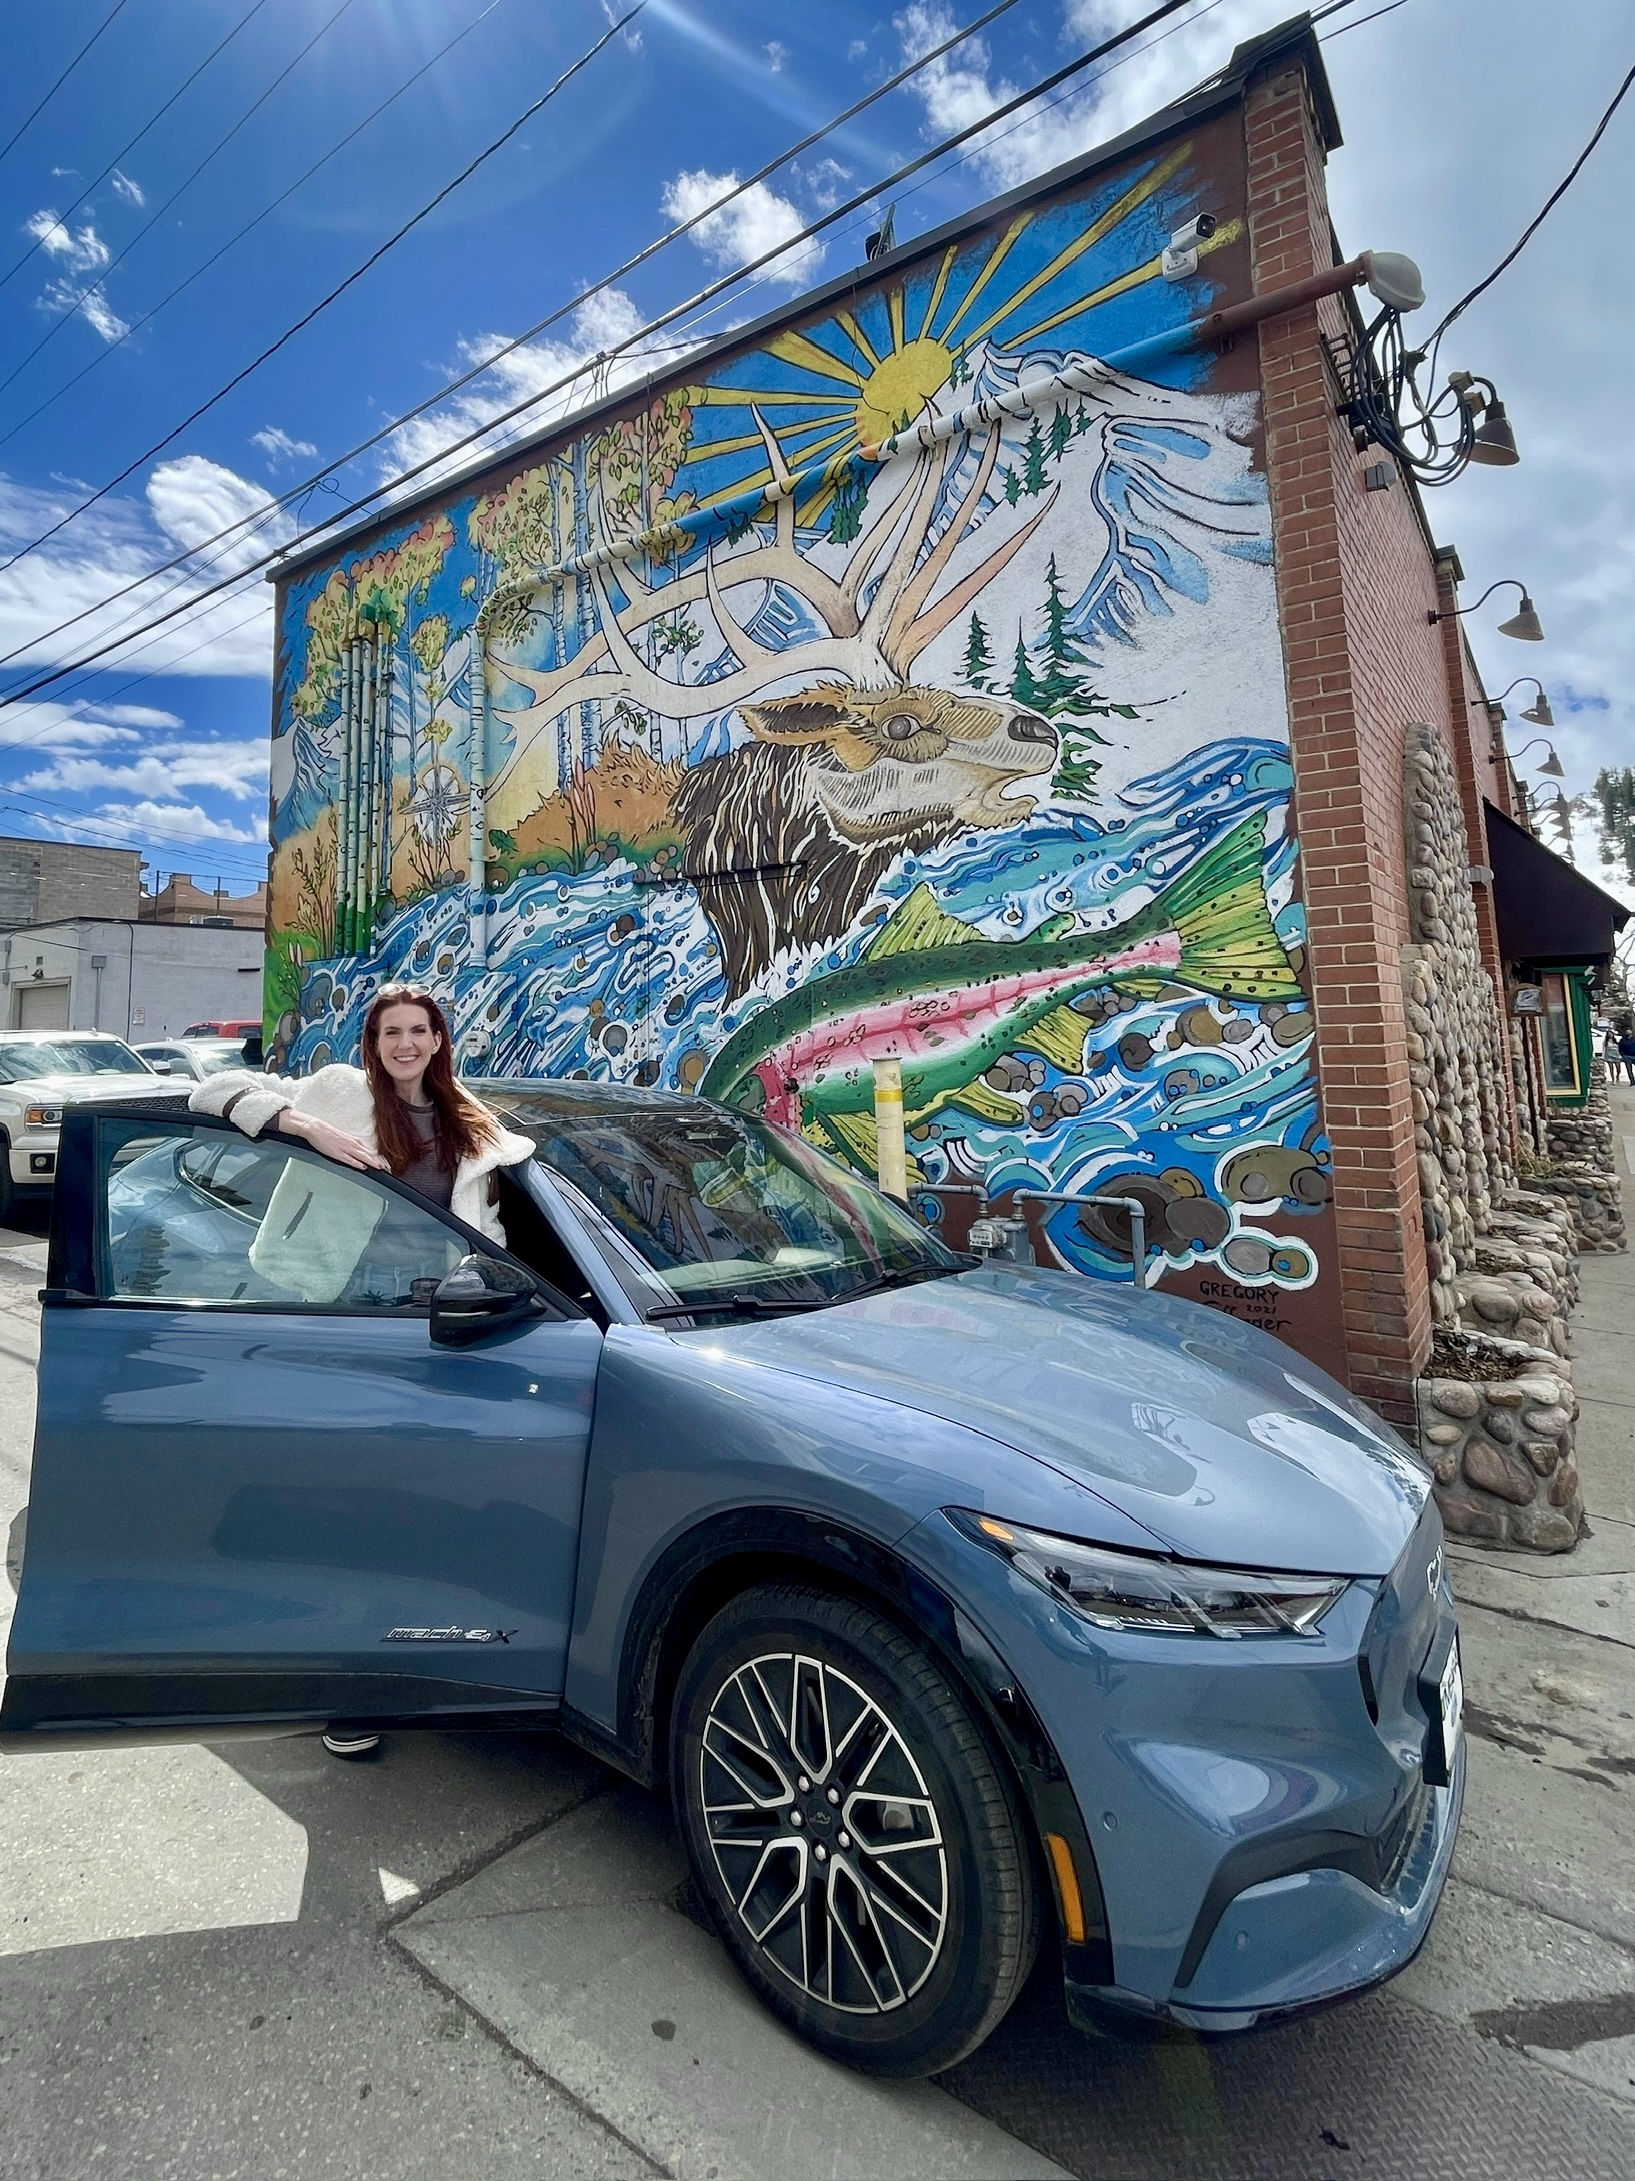 Amanda Bittner stands behind the open passenger door of her gray Ford Mustang Mach-E. The car is parked in front of a colorful mural painted on the side of a building and portrays the sun rising over a snow-capped mountain, with a moose and rainbow trout in the foreground.